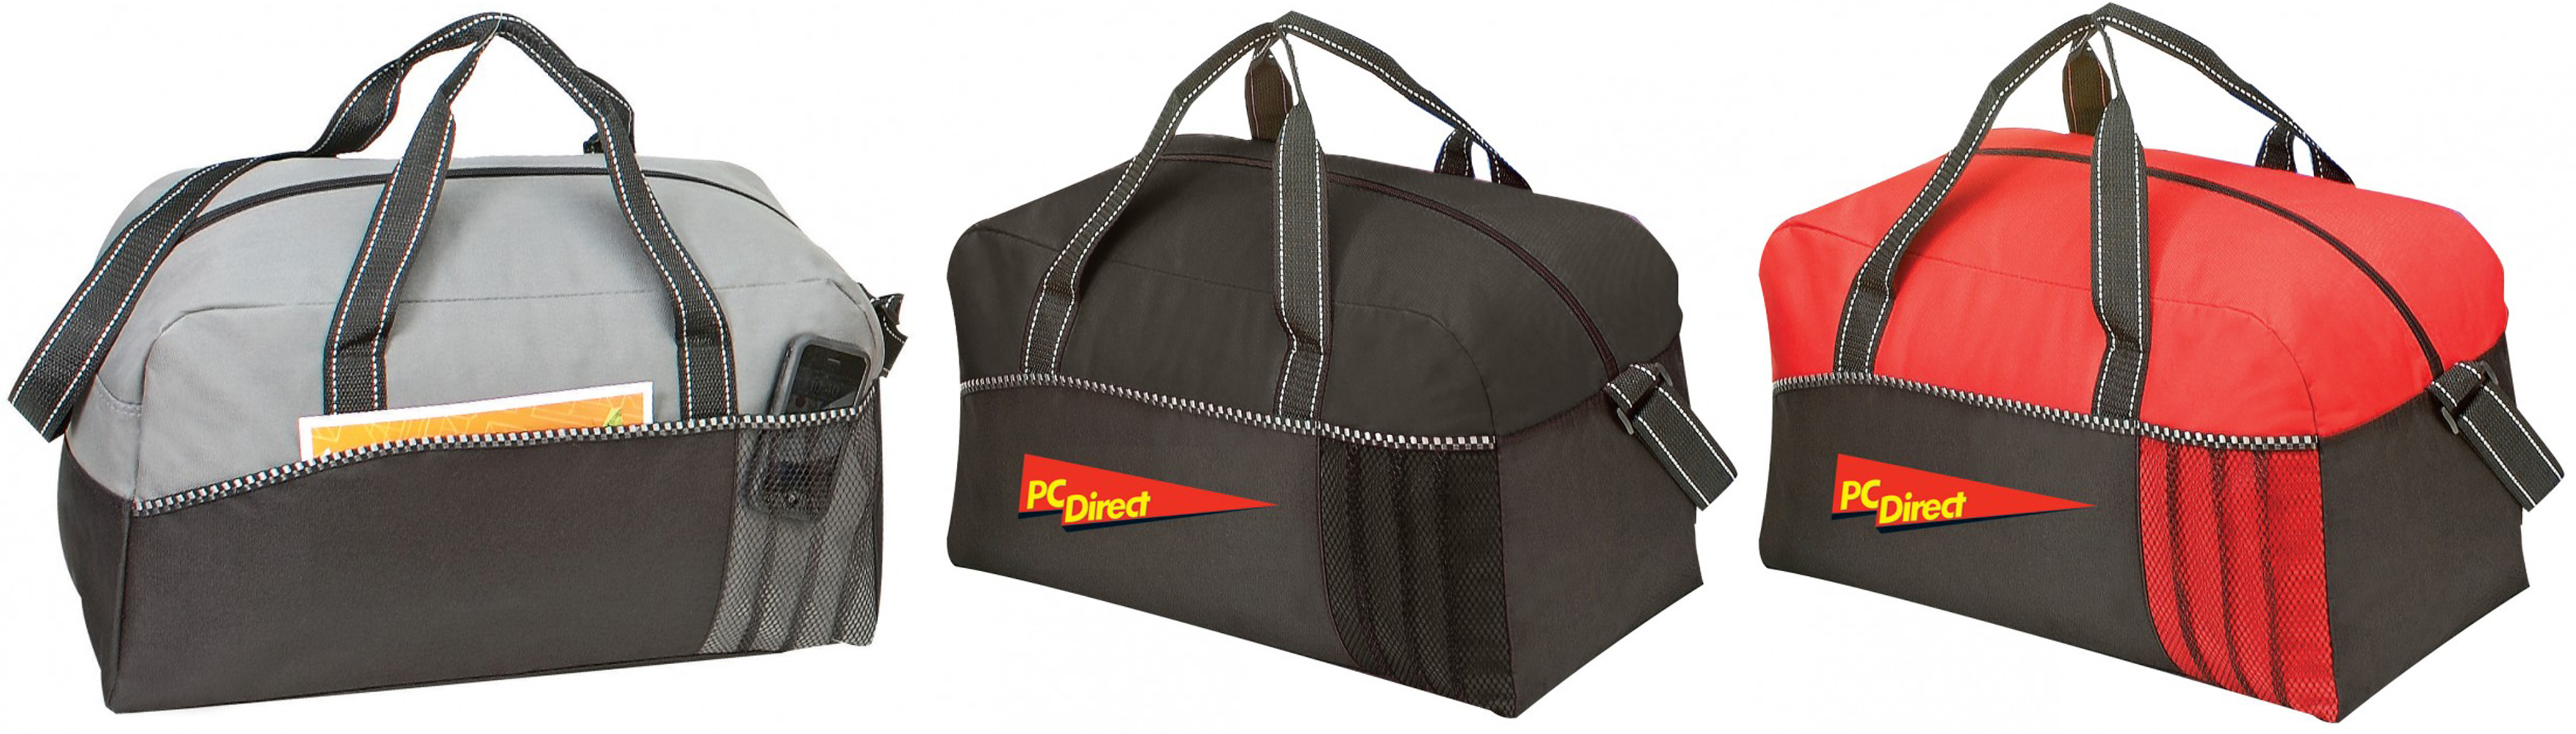 large duffle bag with compartments